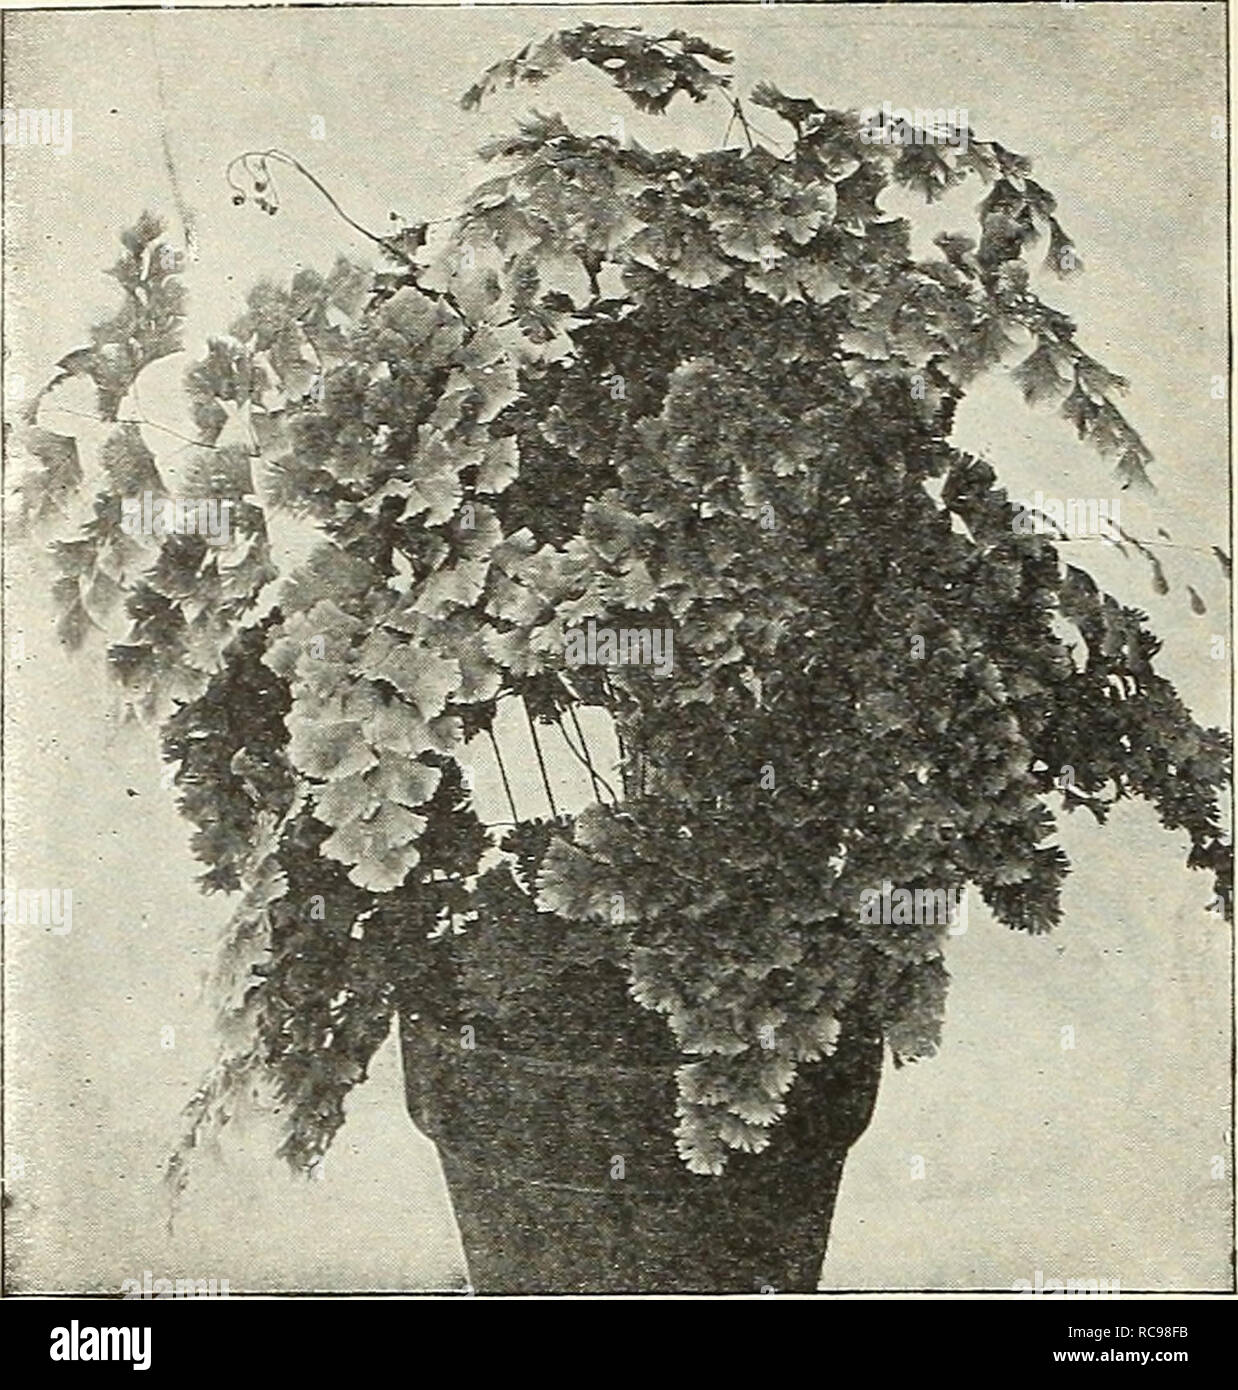 . Dreer's garden book 1924. Seeds Catalogs; Nursery stock Catalogs; Gardening Equipment and supplies Catalogs; Flowers Seeds Catalogs; Vegetables Seeds Catalogs; Fruit Seeds Catalogs. 162 JE^^« ,(]ARDENa«» GREENHOUSE PIANT&gt;S i^HIHBEliPHRlk. The Glory Fern (Adiantum Farleyense Gloriosa) Nephrolepis Elegantissima Com- pacta {Crested Boston Fern). A neatly crested form of the Boston Fern. 4-inch pots, 50 cts.; 6-inch pots, SI-50 each. Polypodium Mandaianum Seed- lings. Fronds wavy and undulated and of an attractiv-e glaucous-blue color; very hardy house plants. 4-inch pots, 75 cts. each. Pter Stock Photo